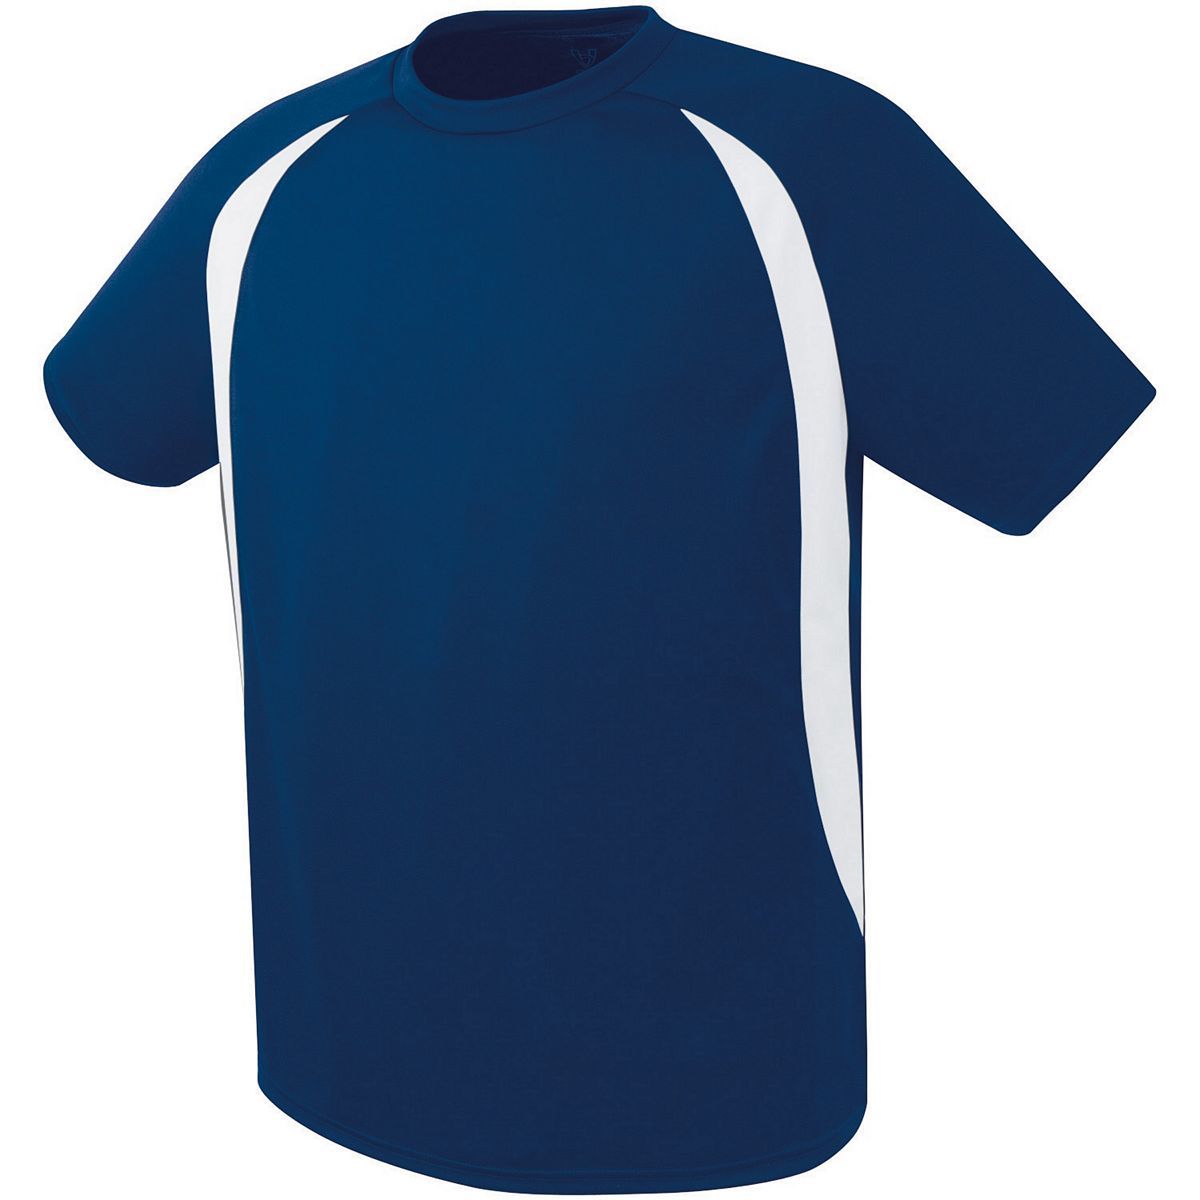 High 5 Youth Liberty Soccer Jersey in Navy/White  -Part of the Youth, Youth-Jersey, High5-Products, Soccer, Shirts, All-Sports-1 product lines at KanaleyCreations.com